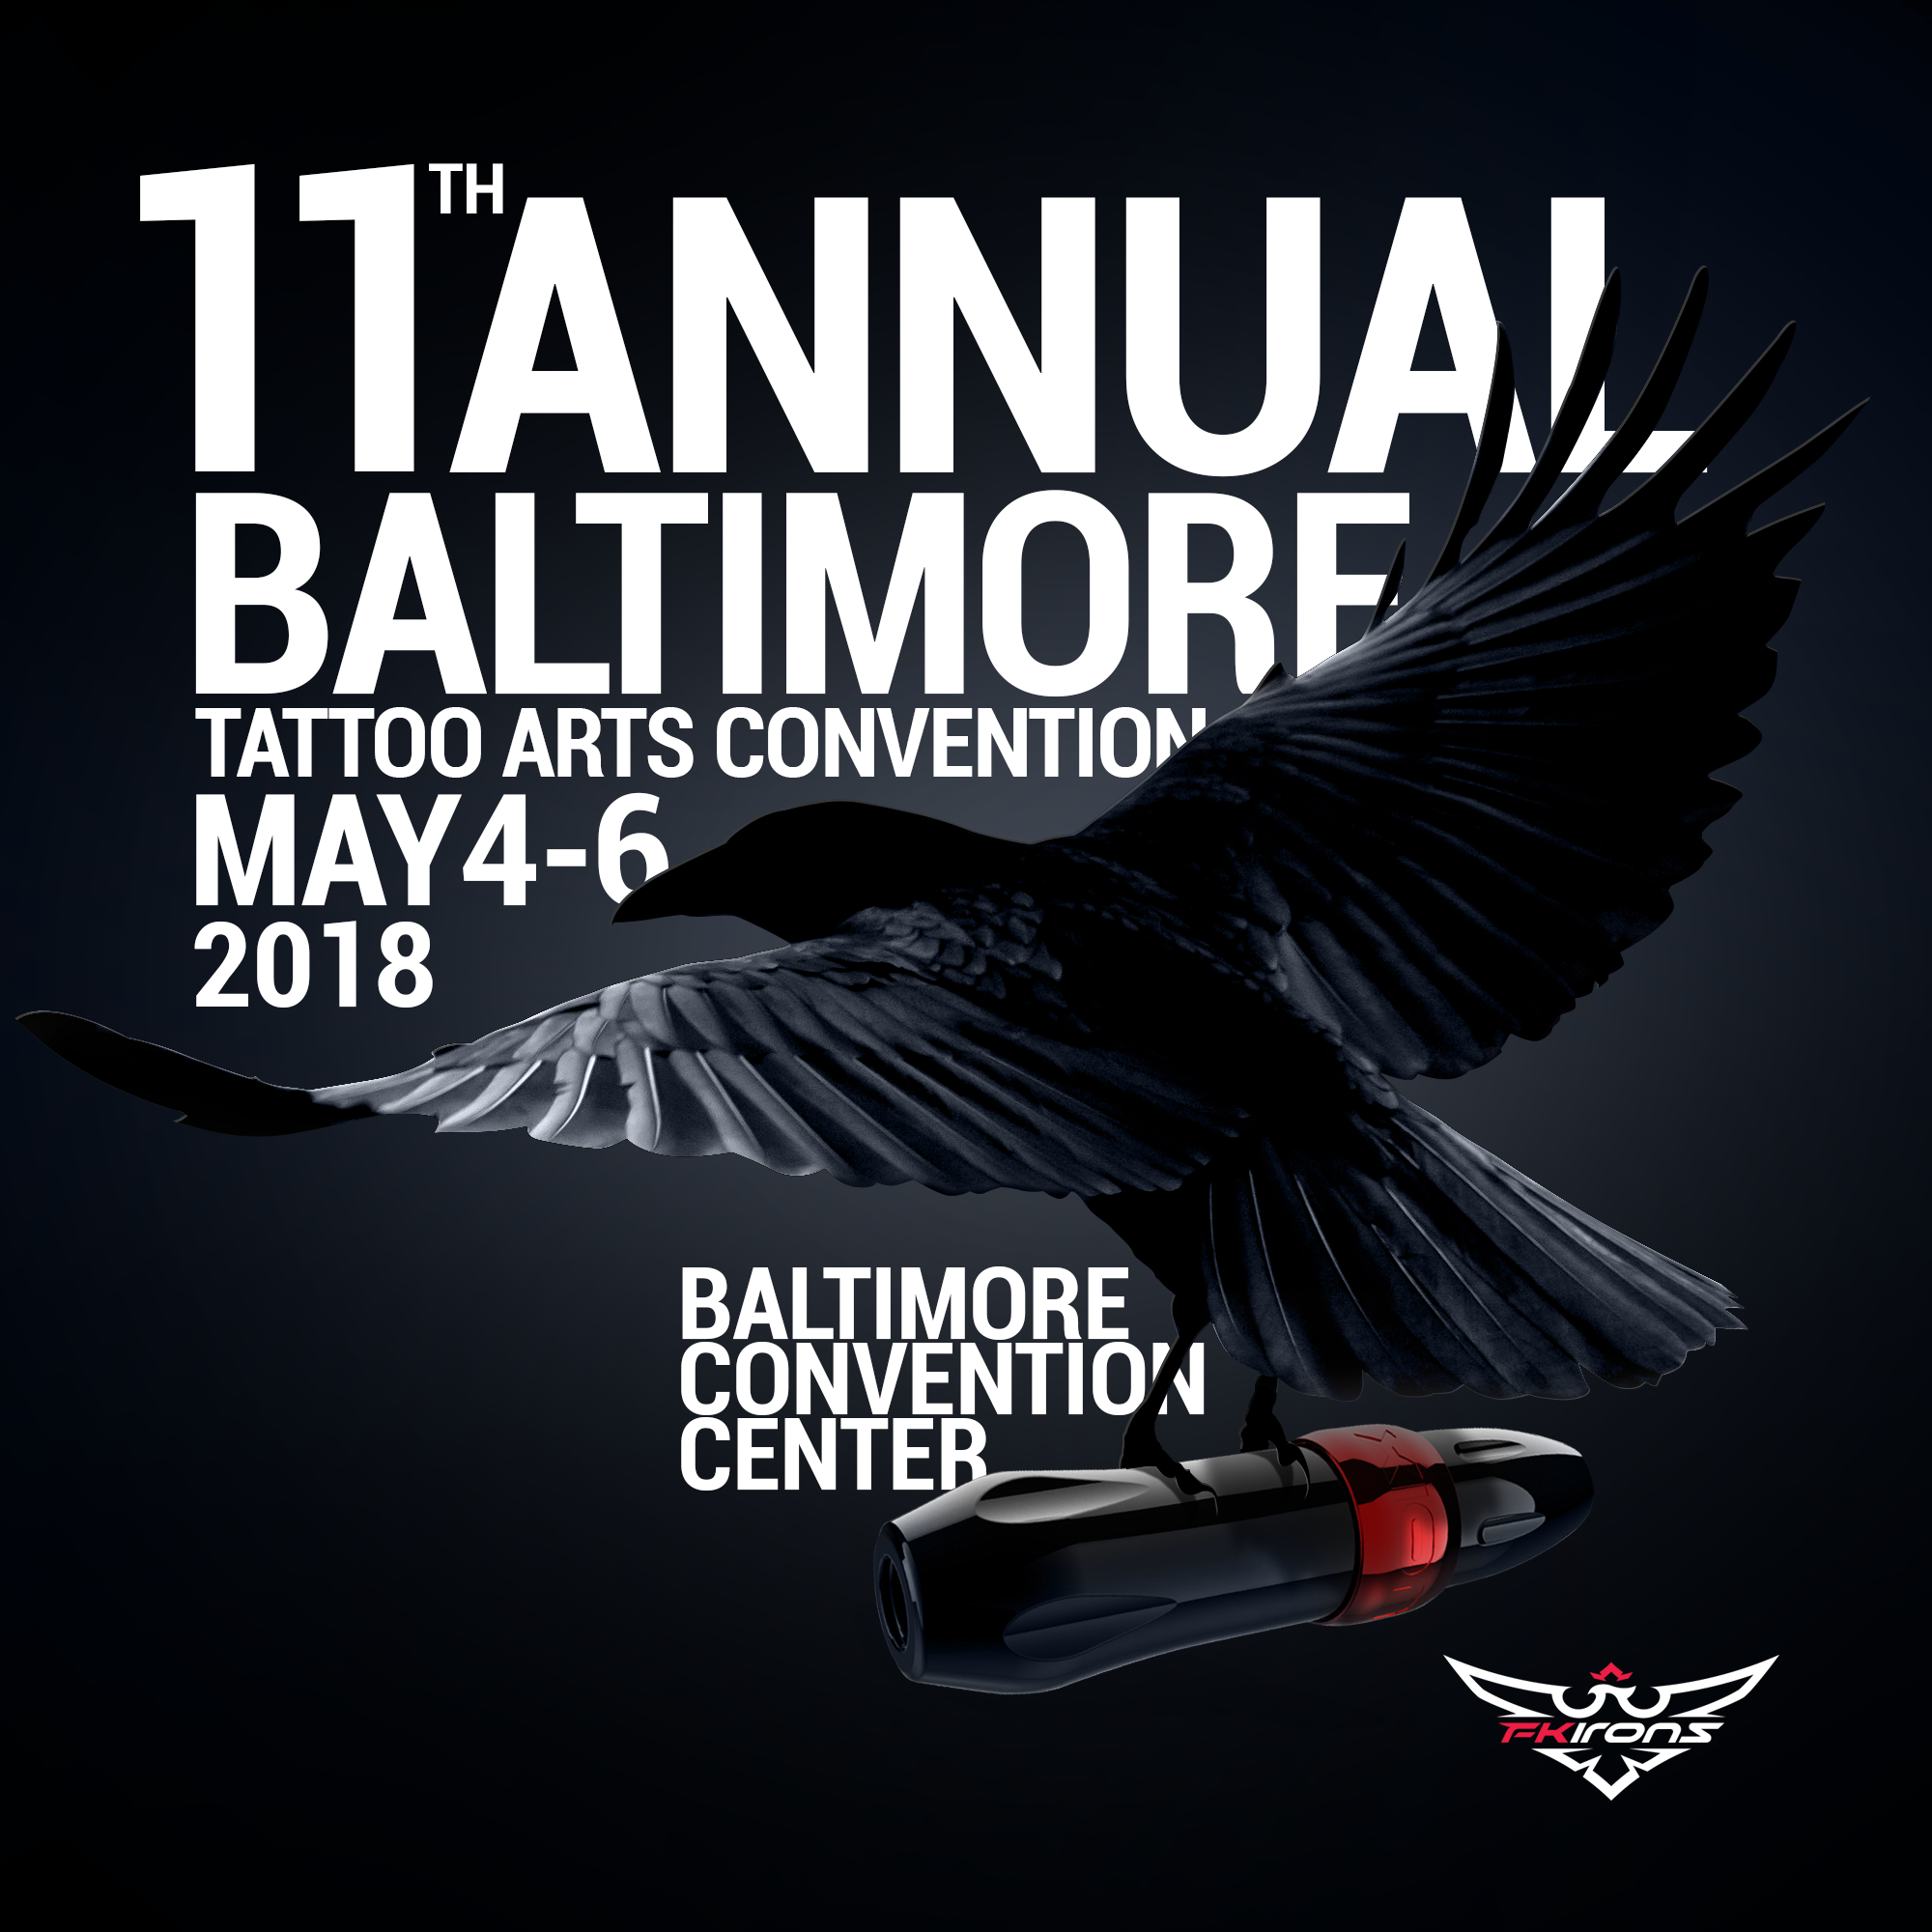 Convention Calendar  Baltimore Tattoo Convention event in Baltimore  Maryland United States at Baltimore Convention Center starting Fri 13 May  2022